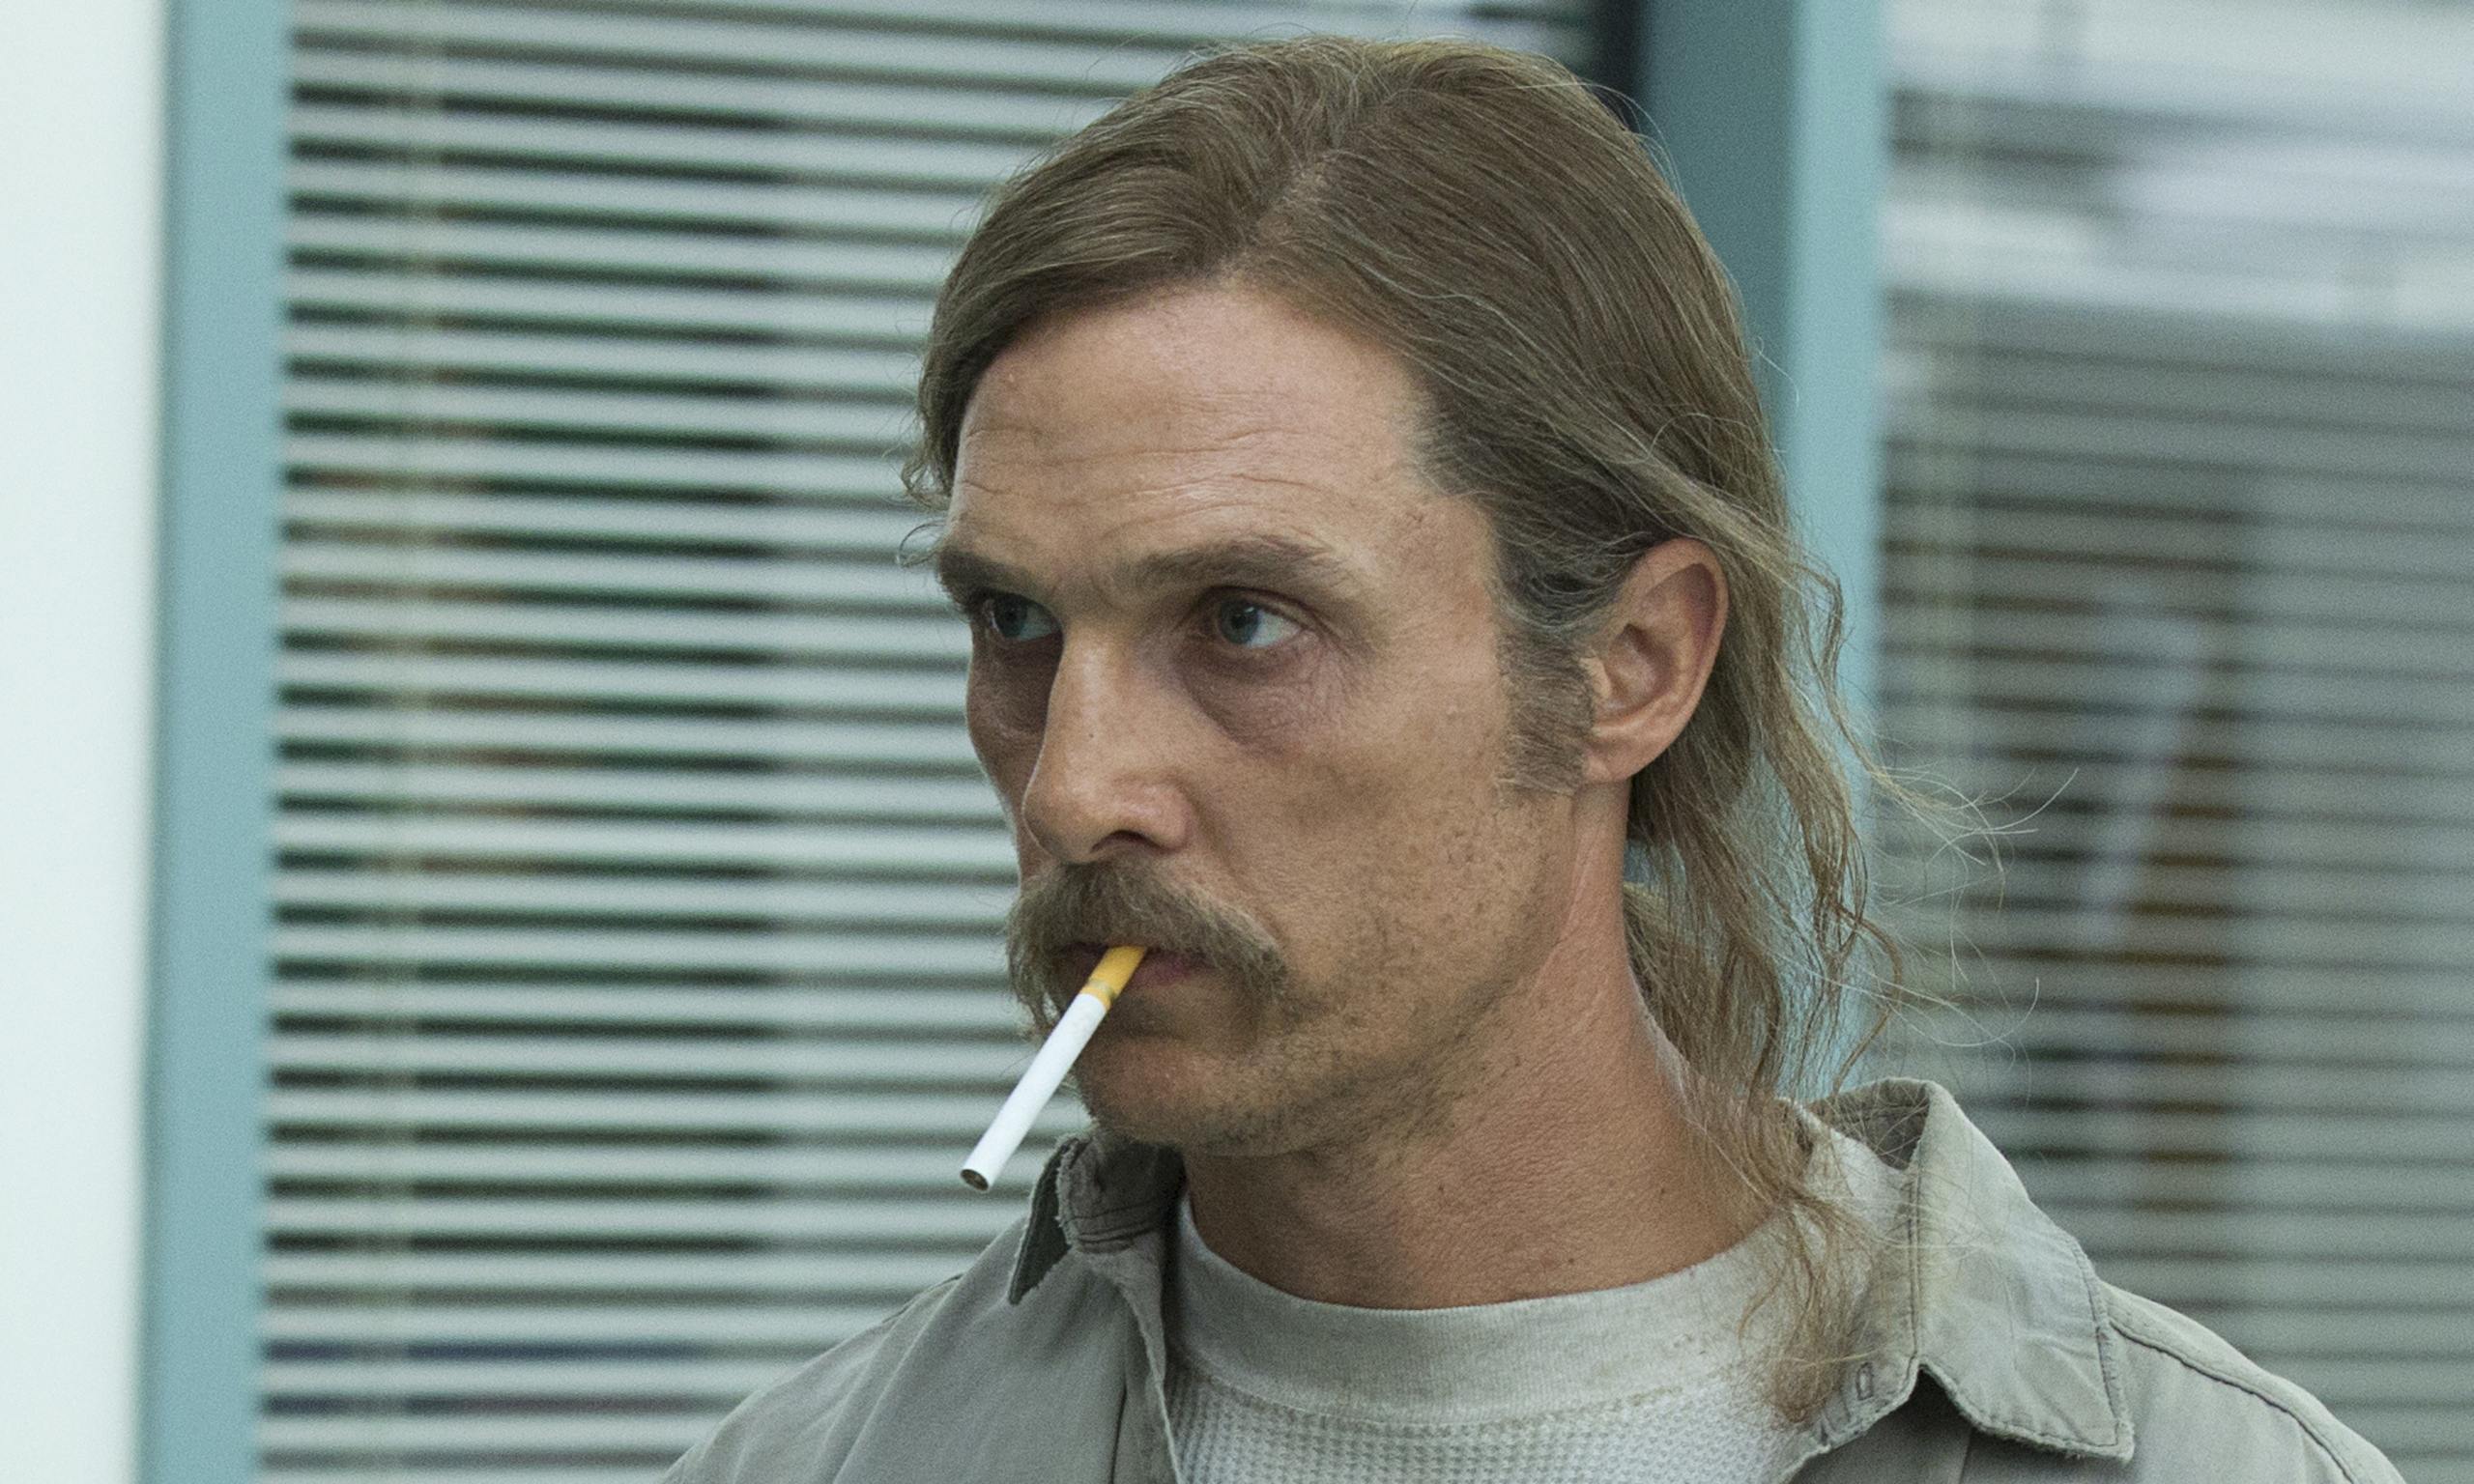 Ruse Cohle   he's here to help.